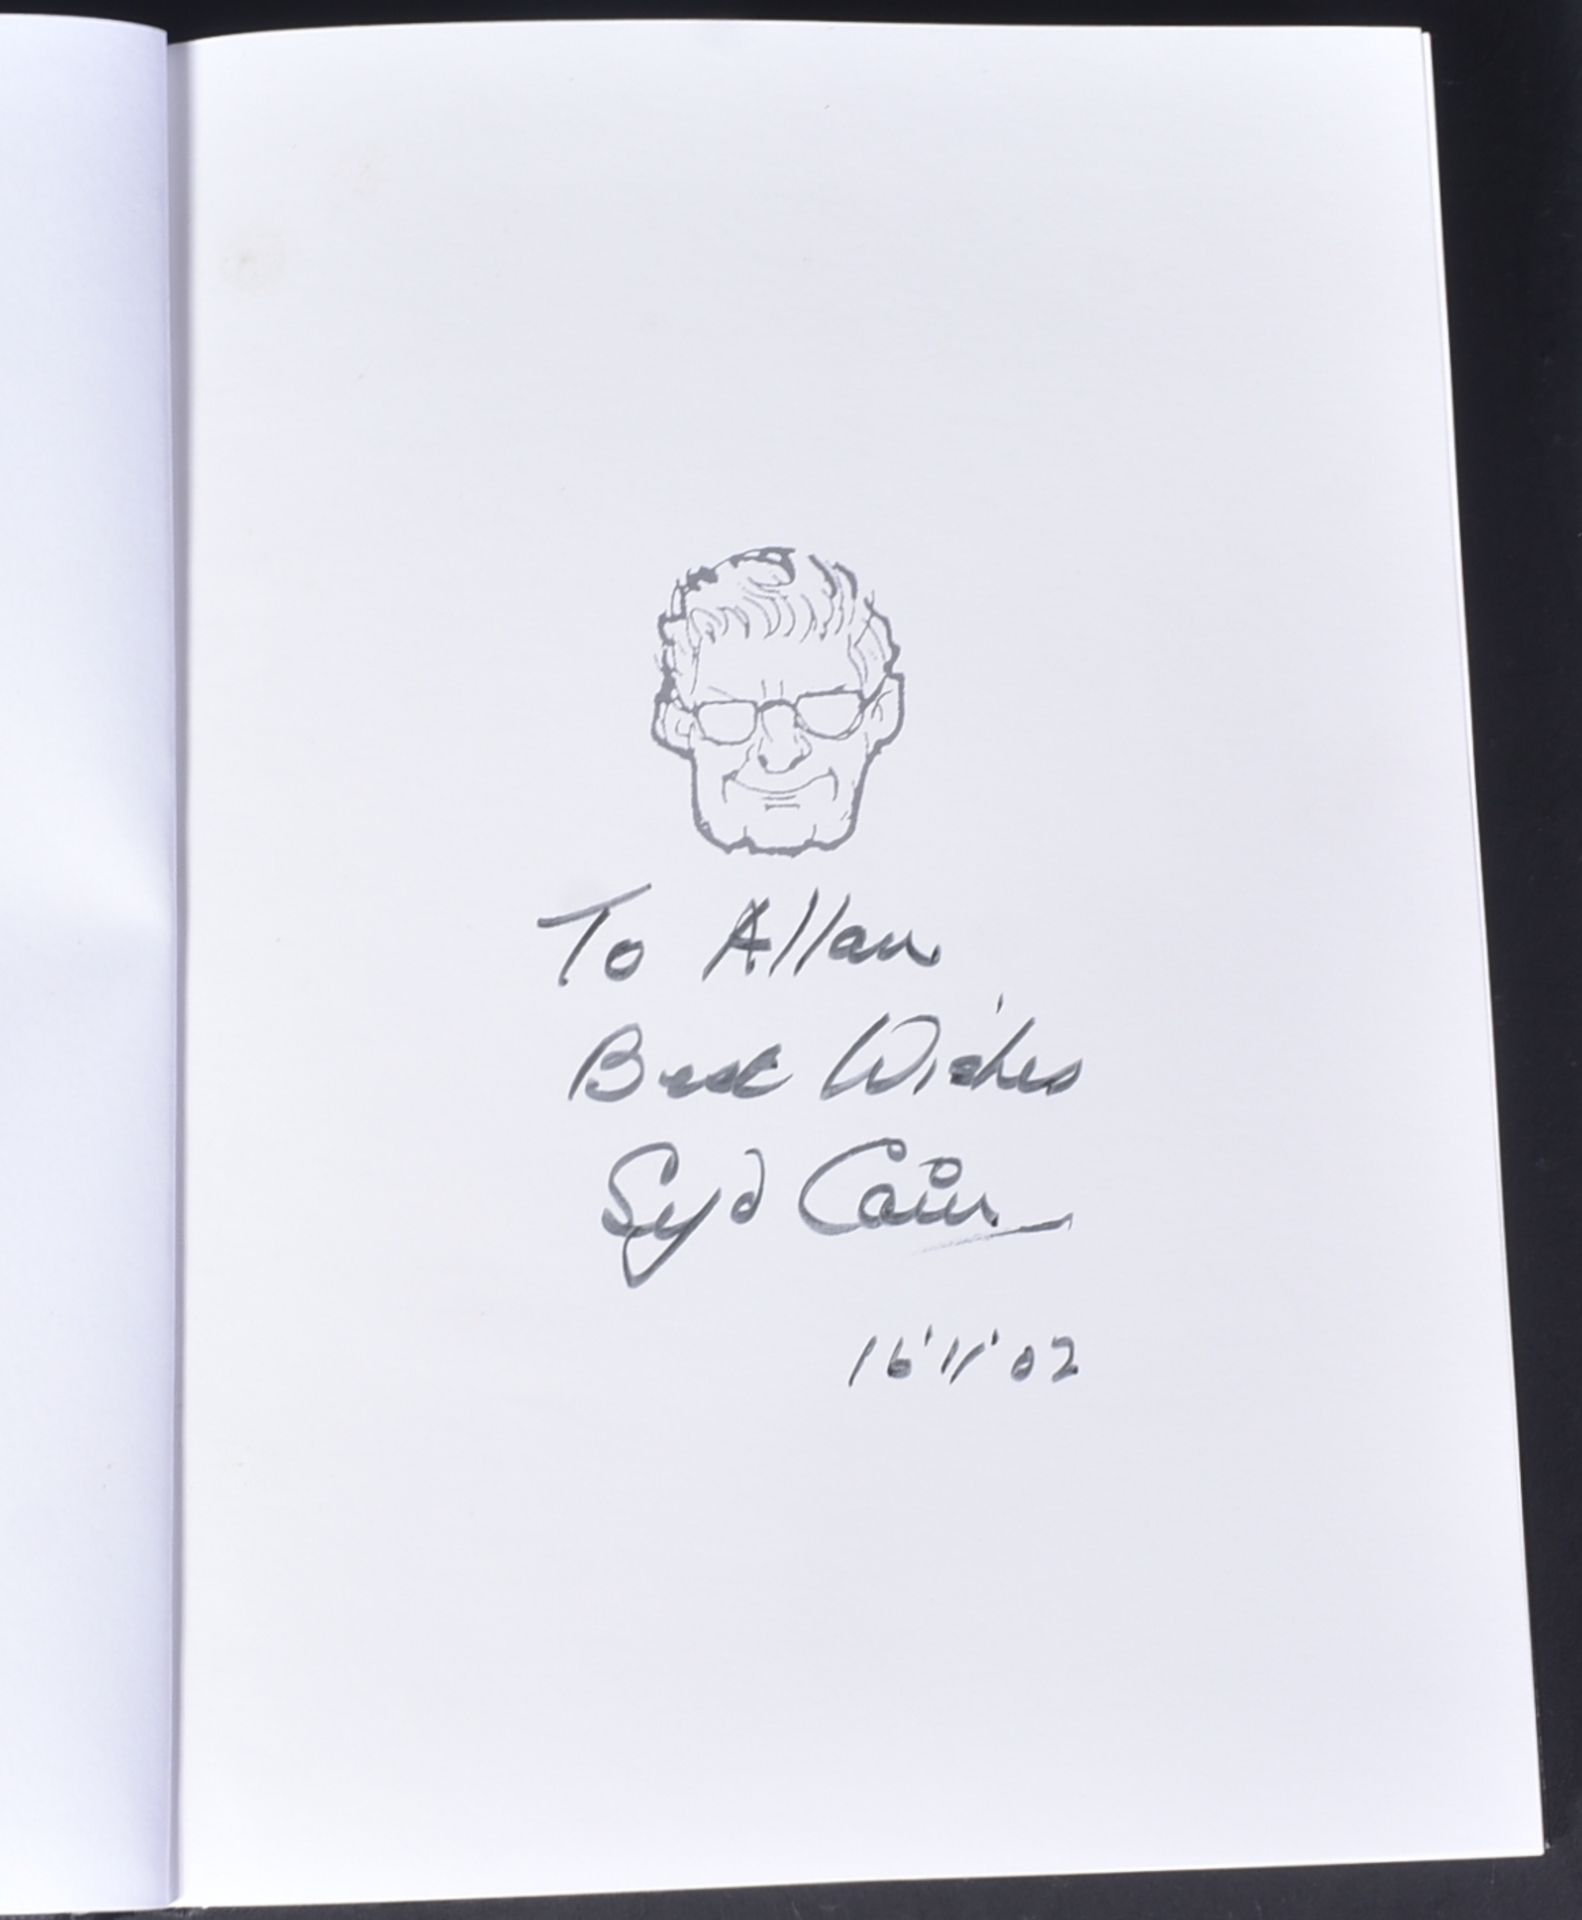 LIMITED EDITION SIGNED BOOK BY SYD CAIN - NOT FORGETTING JAMES BOND - Image 3 of 3